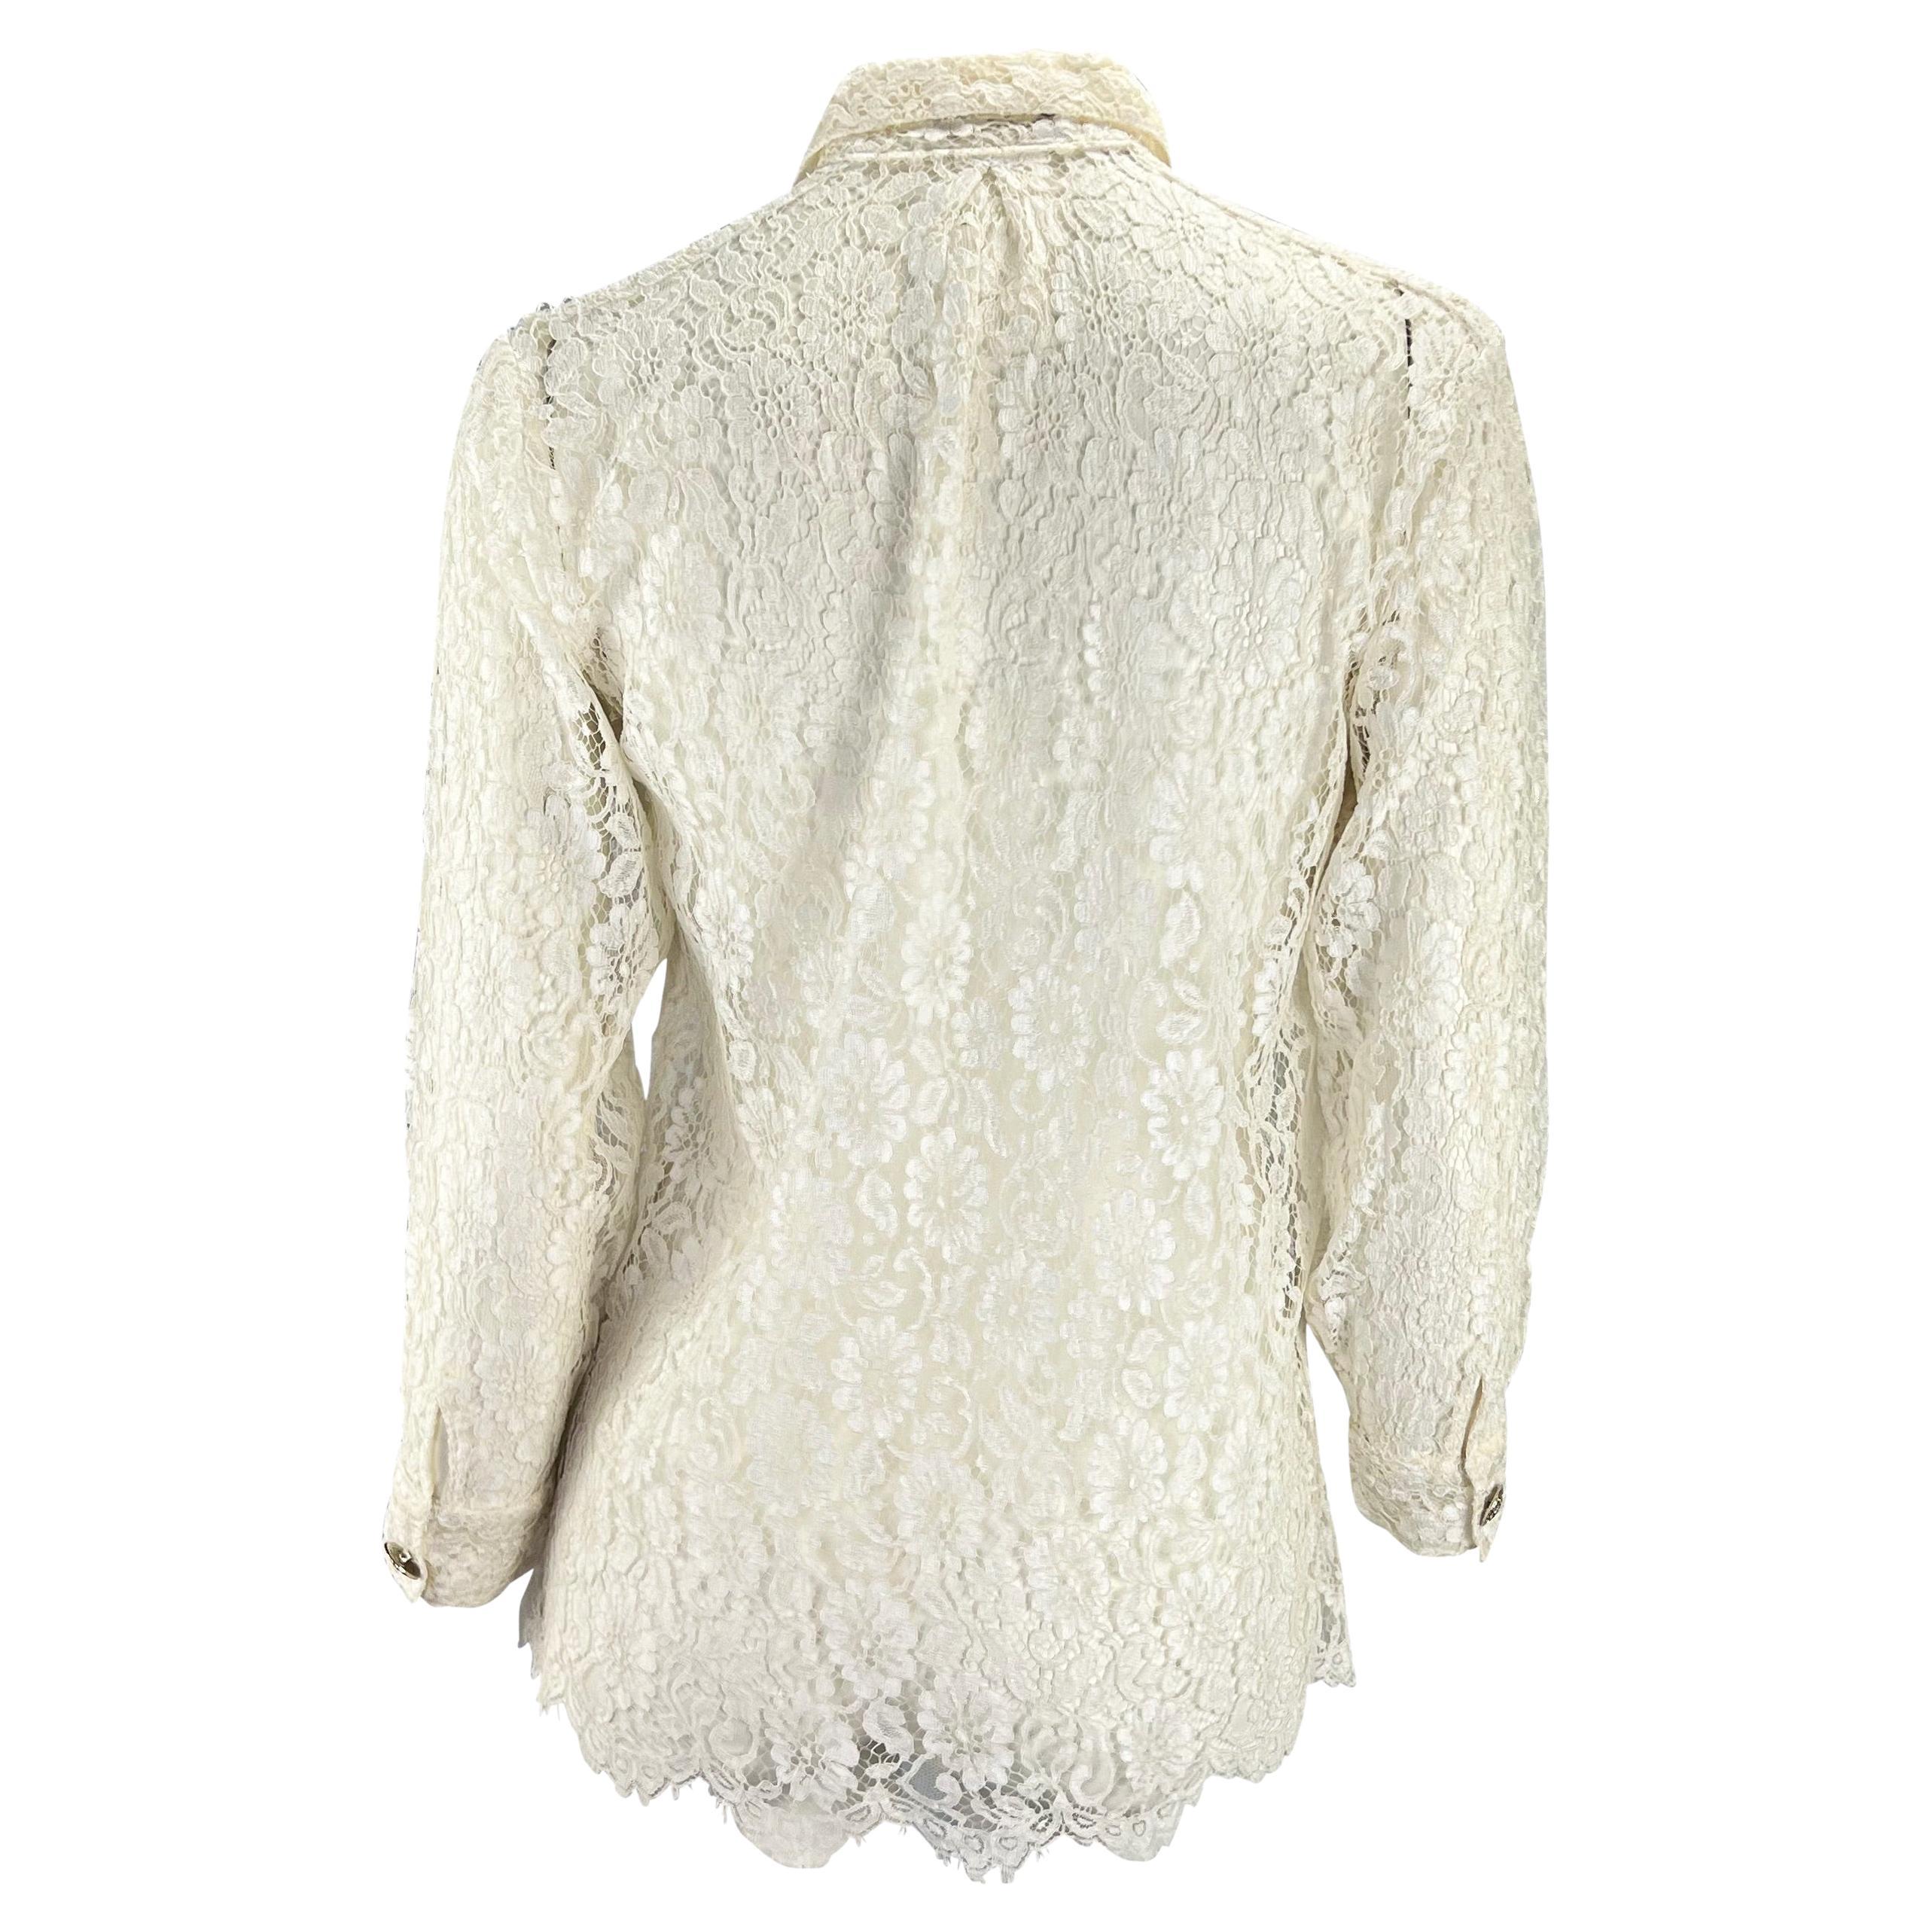 Women's S/S 1994 Gianni Versace Couture Sheer White Lace Button Up Medusa Top For Sale